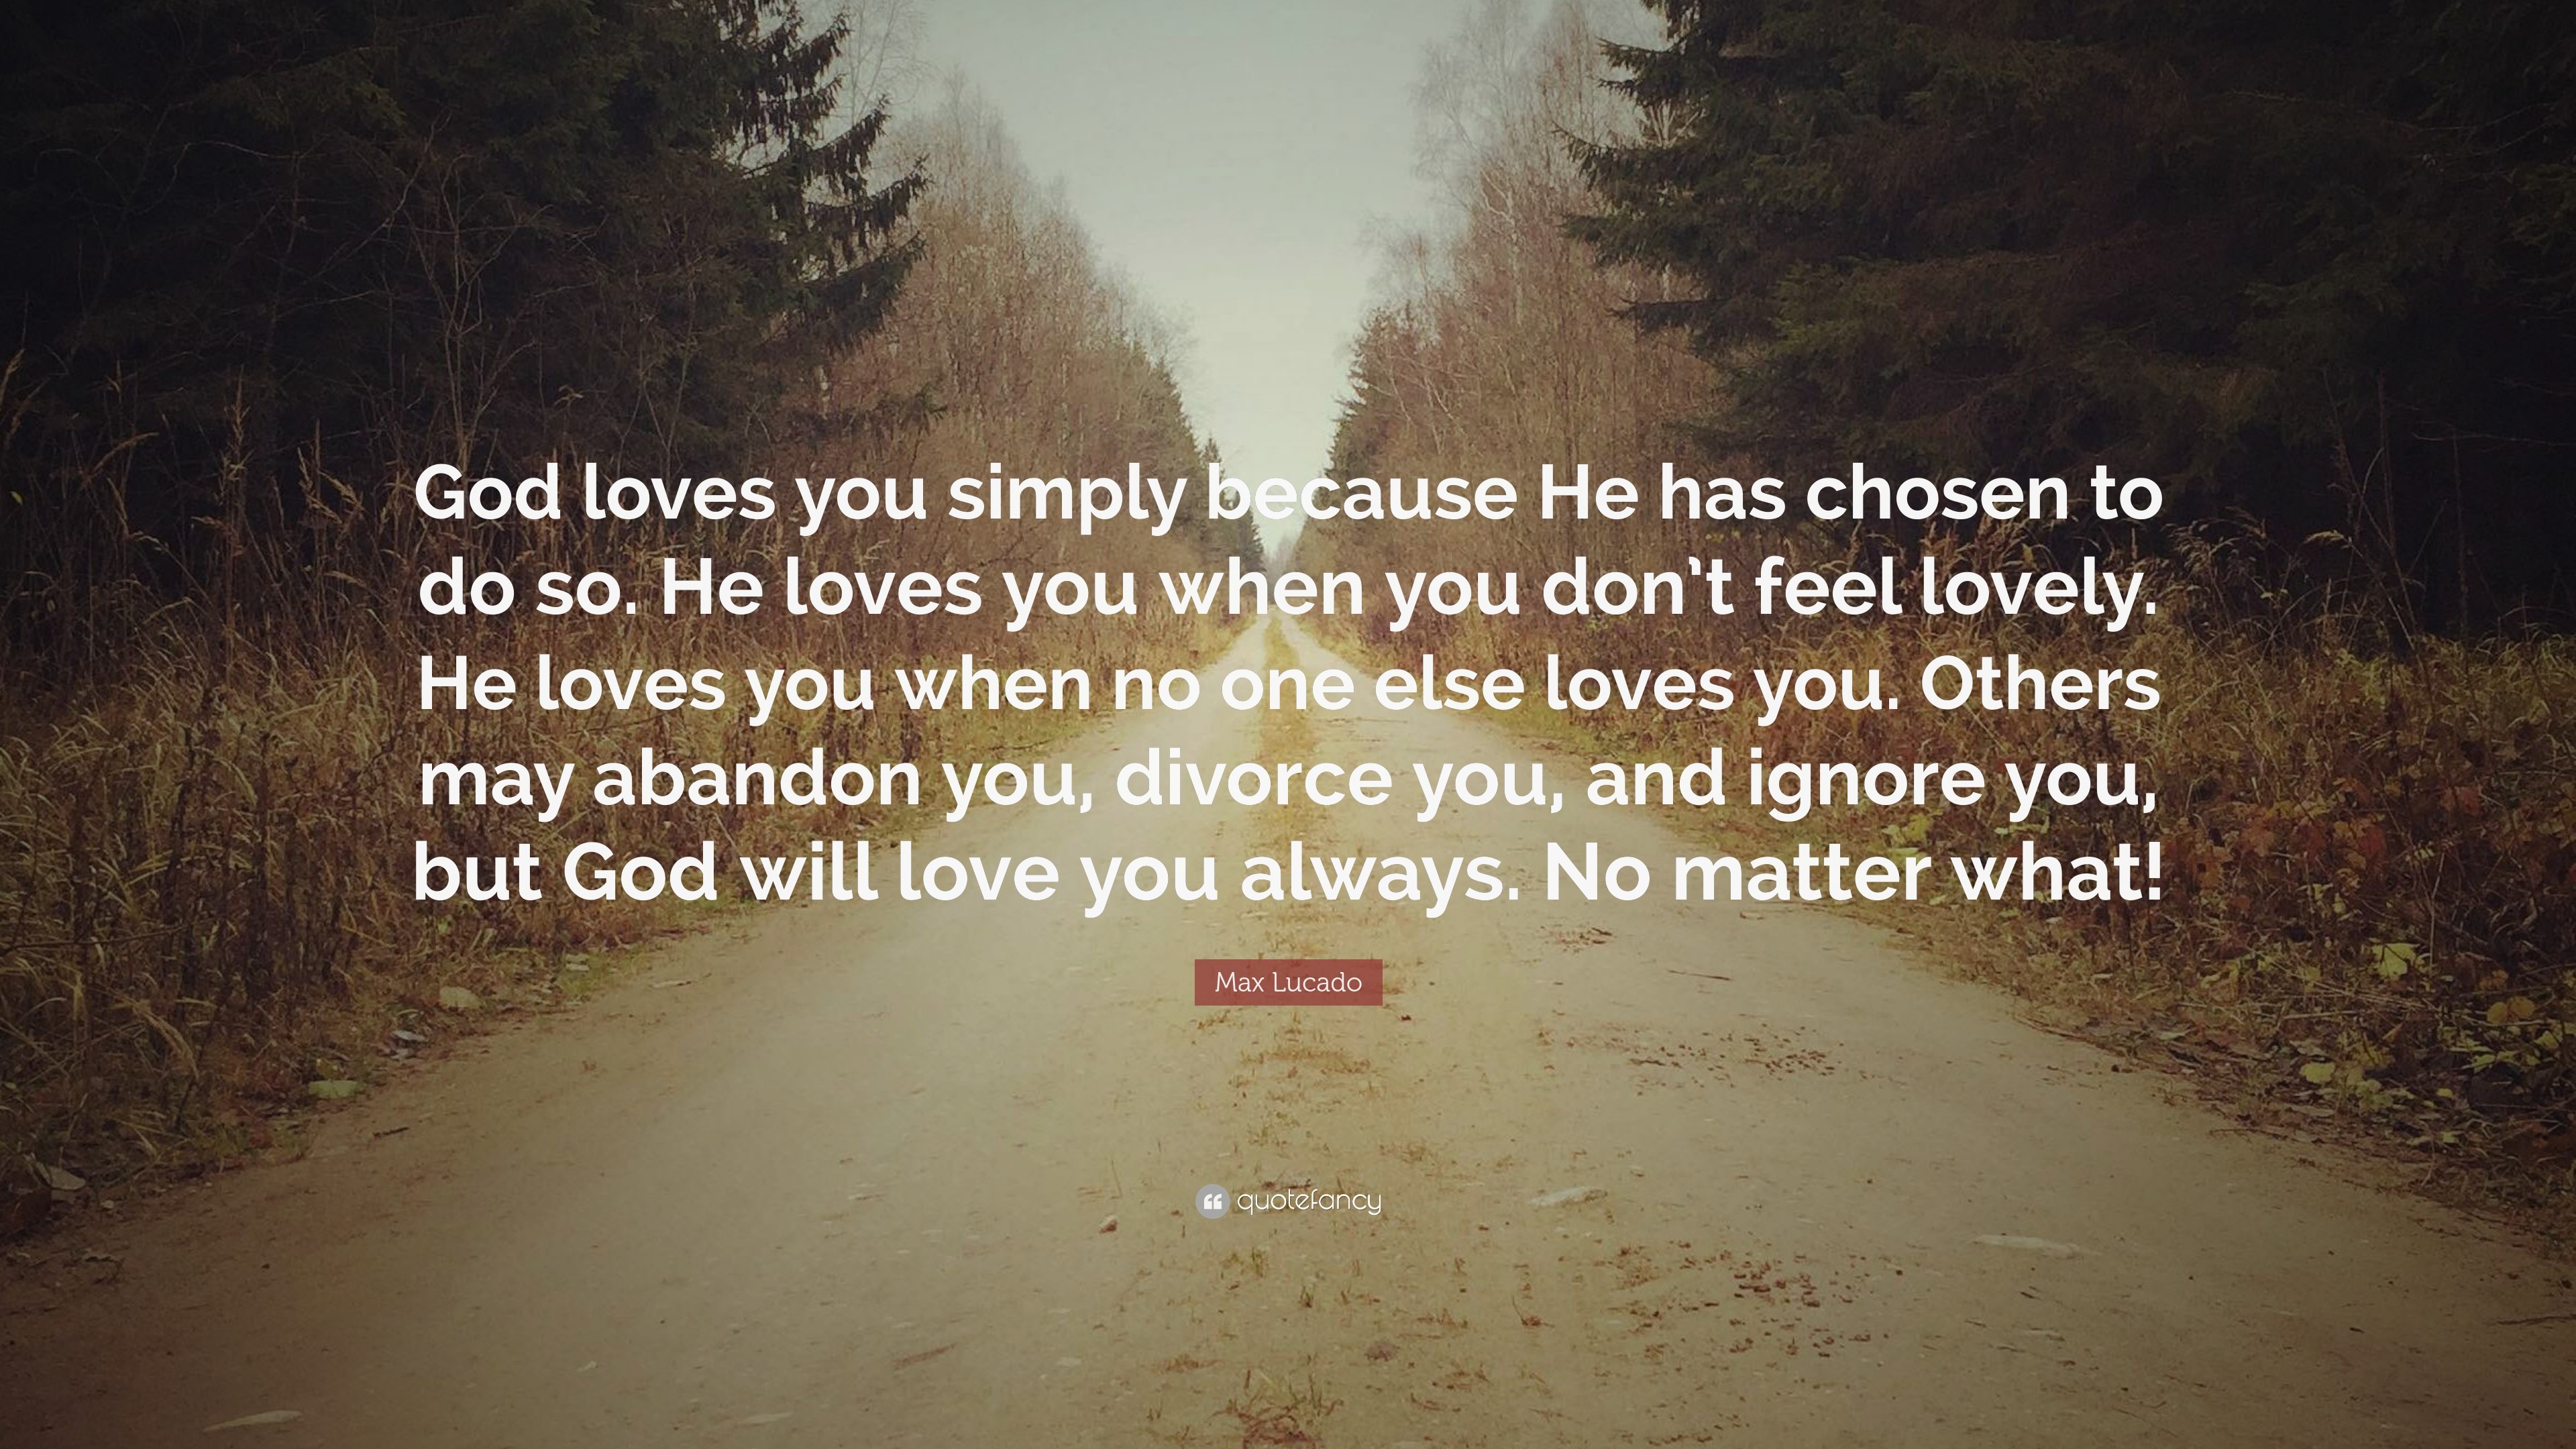 3840x2160 Love You Quotes: “God loves you simply because He has chosen to do so